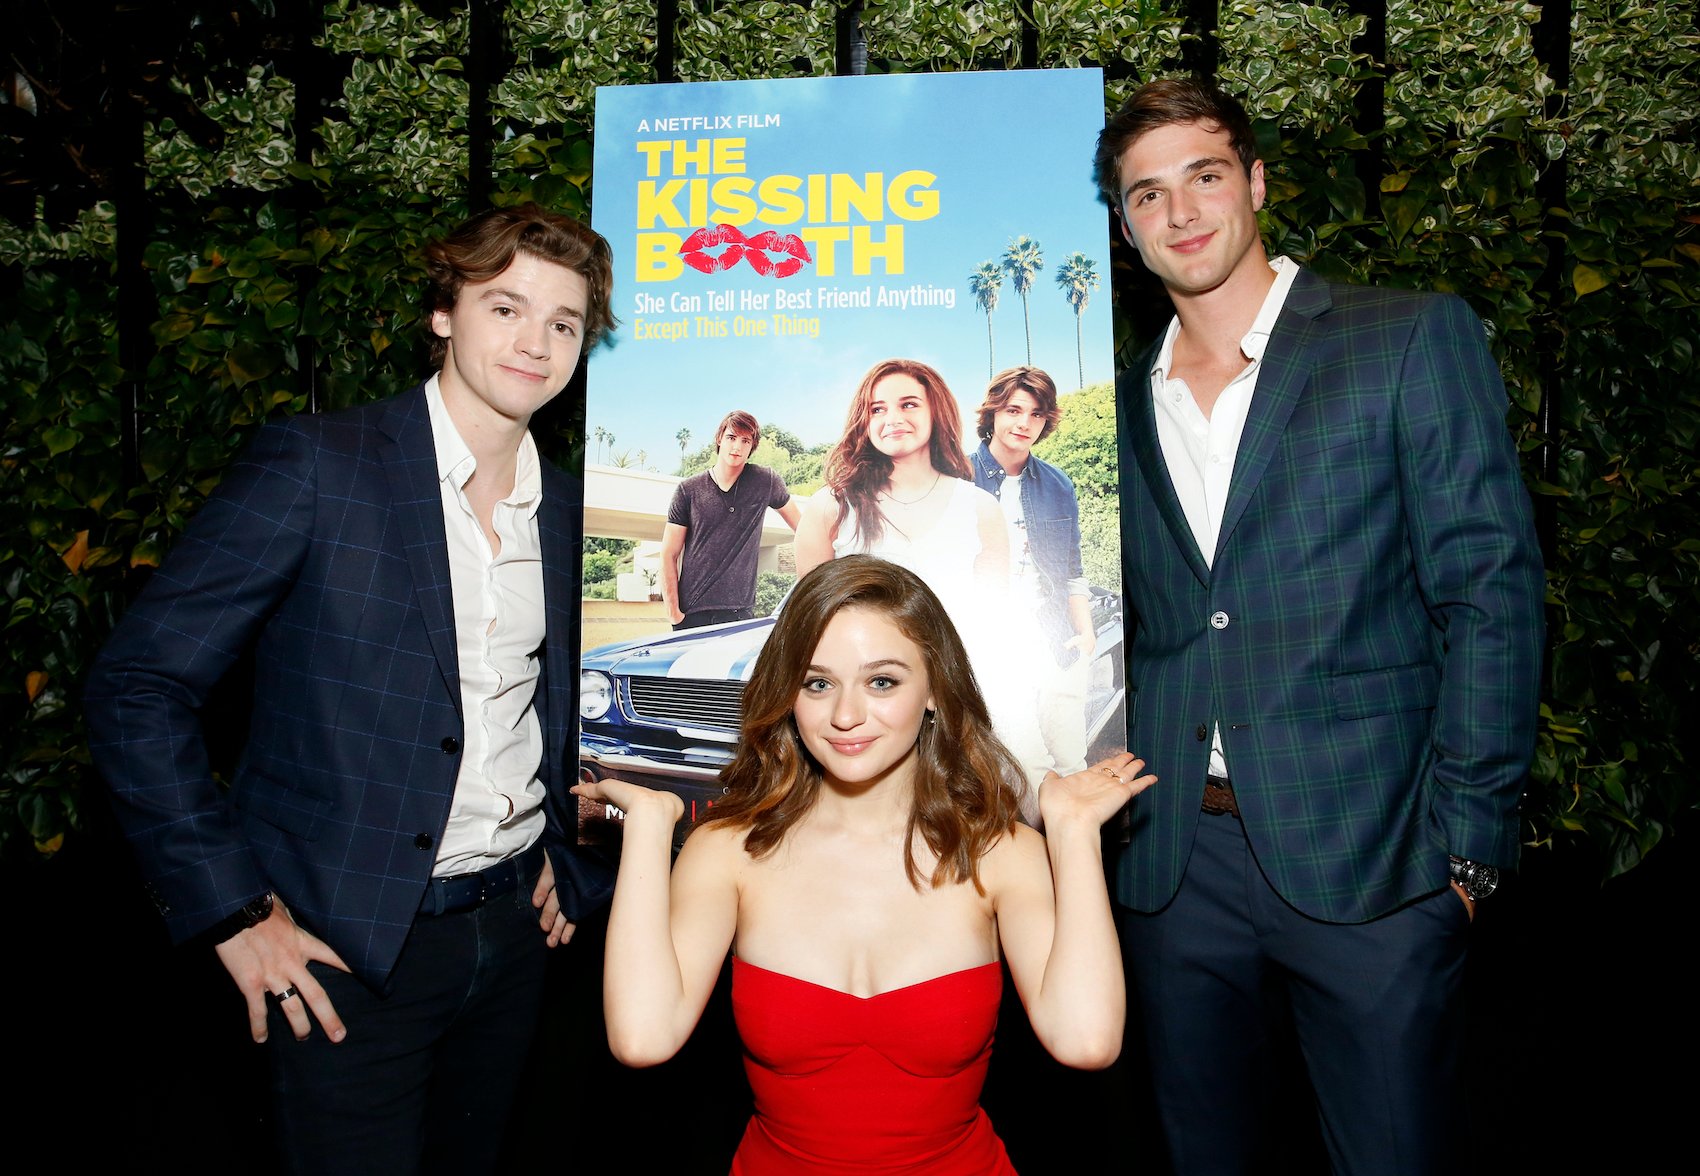 https://www.cheatsheet.com/wp-content/uploads/2020/07/Joel-Courtney-Joey-King-and-Jacob-Elordi-at-a-screening-of-The-Kissing-Booth.jpg